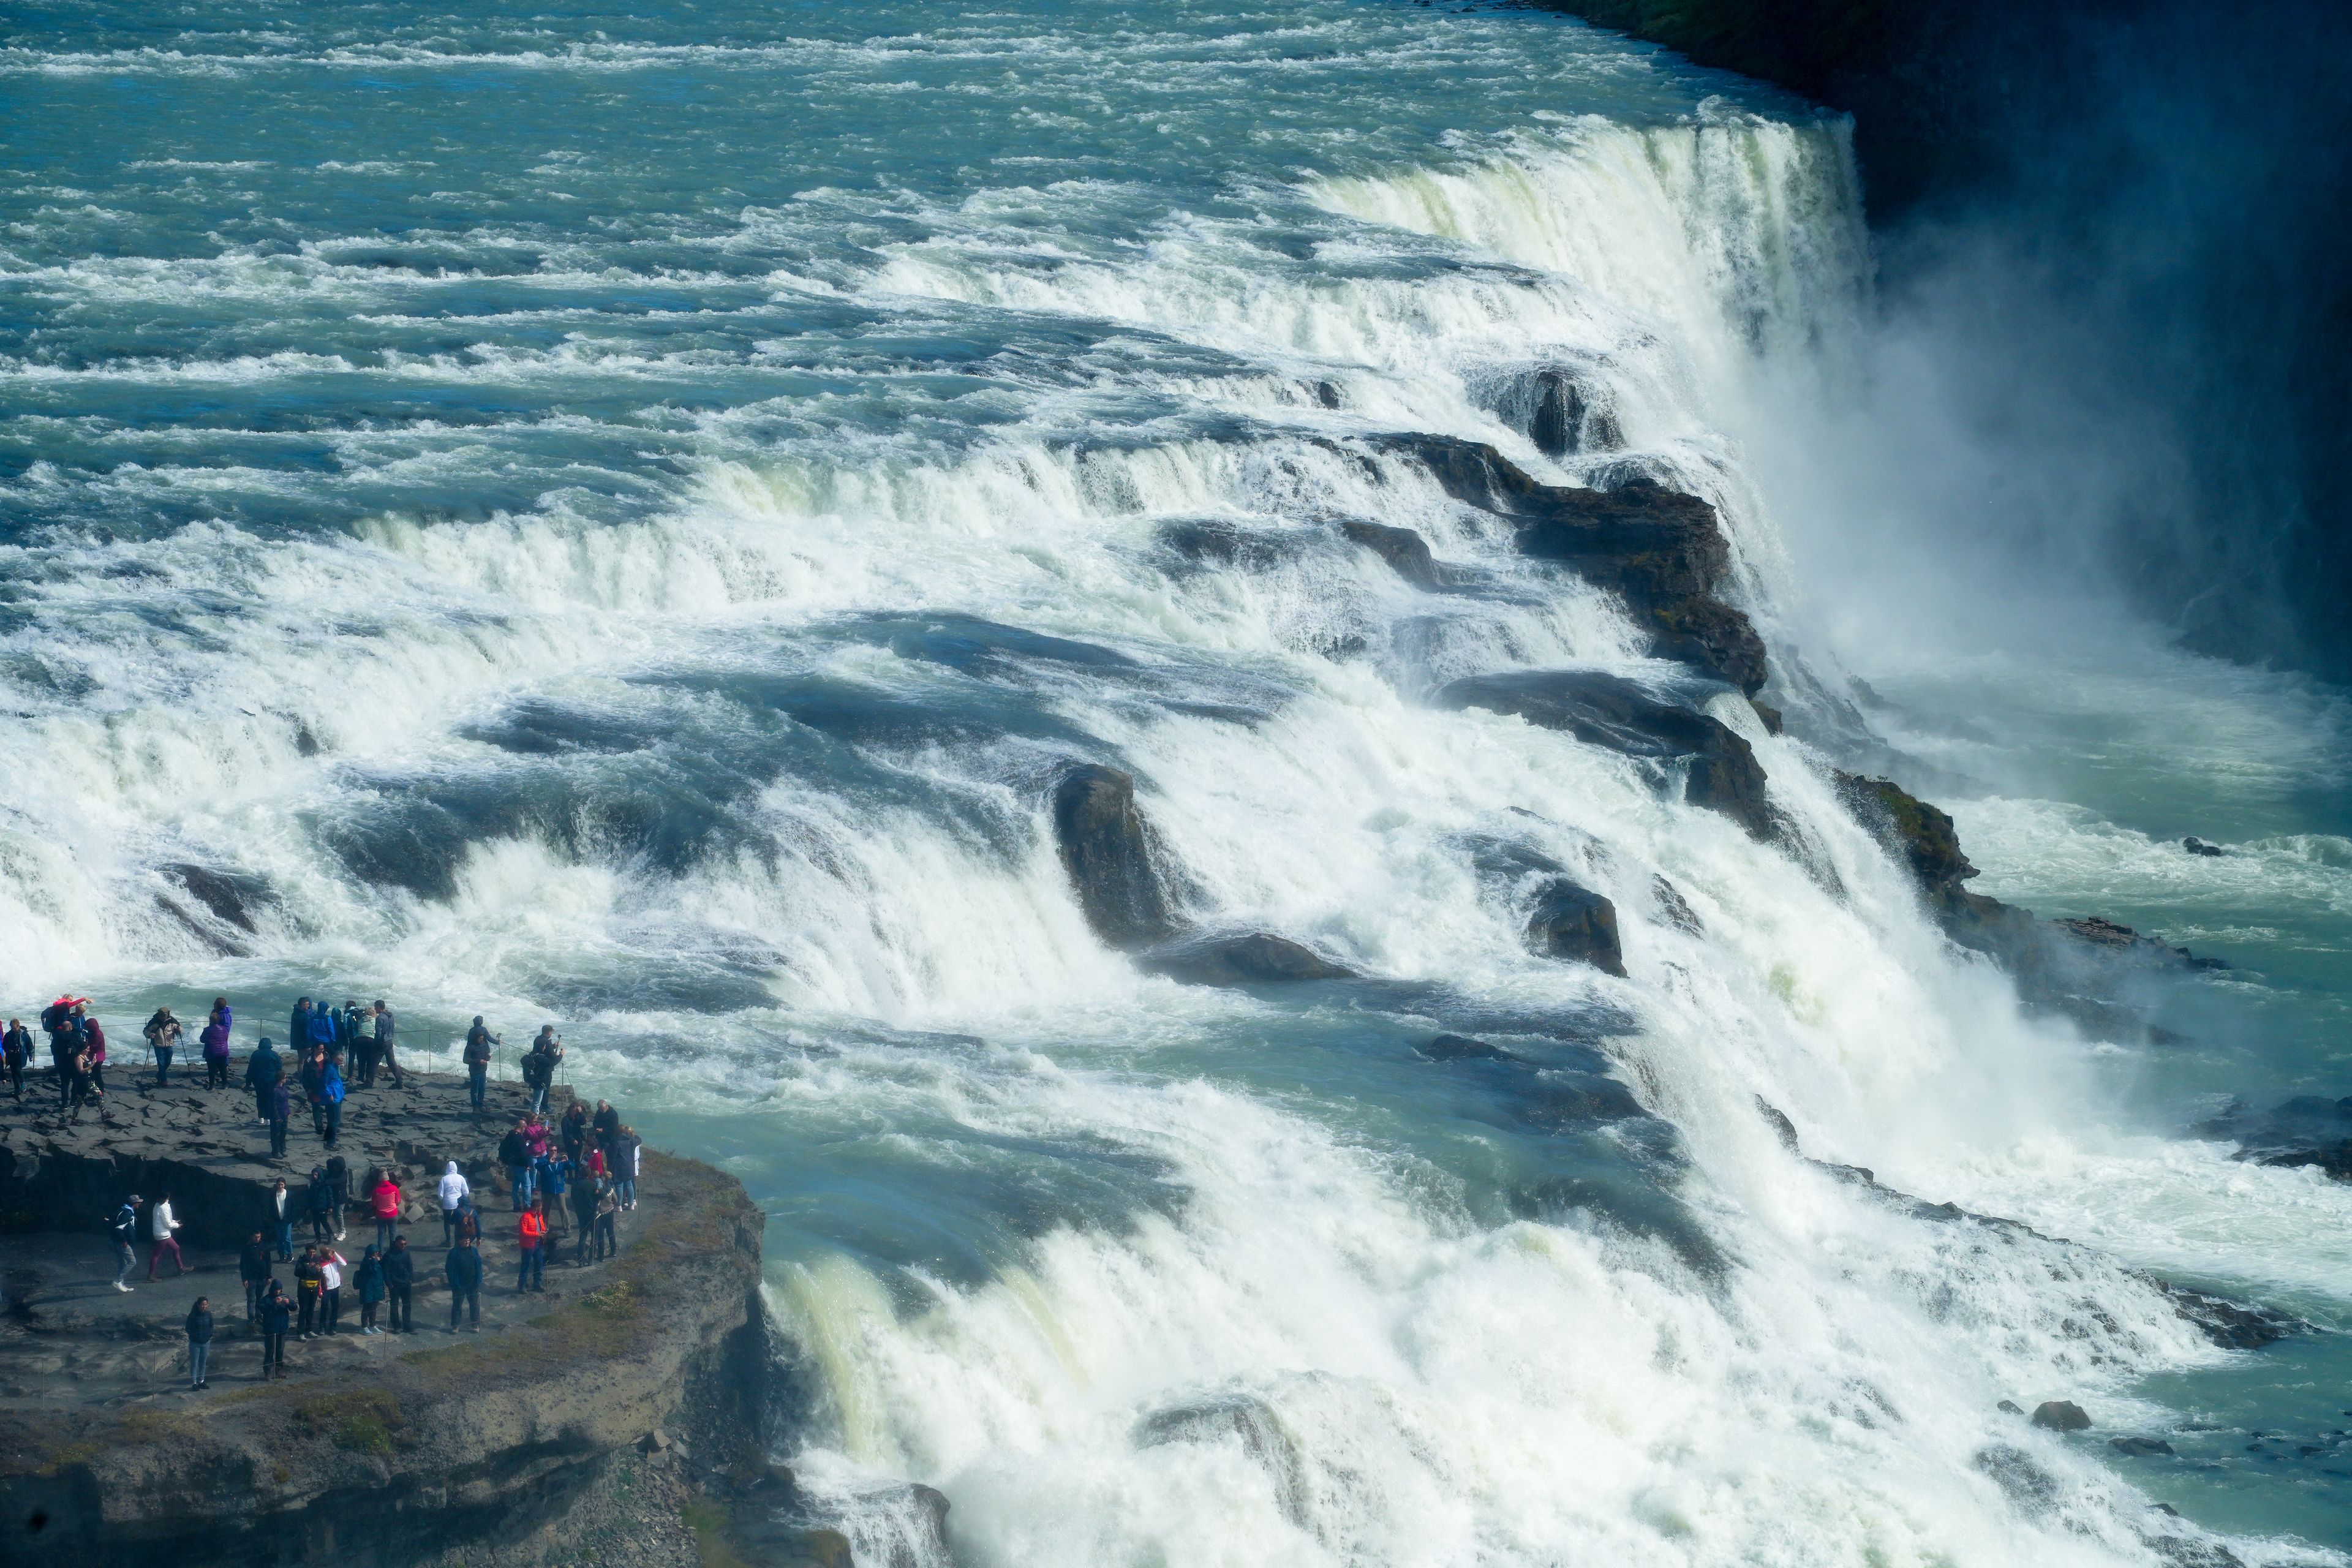 People admiring Gullfoss waterfall from the view point